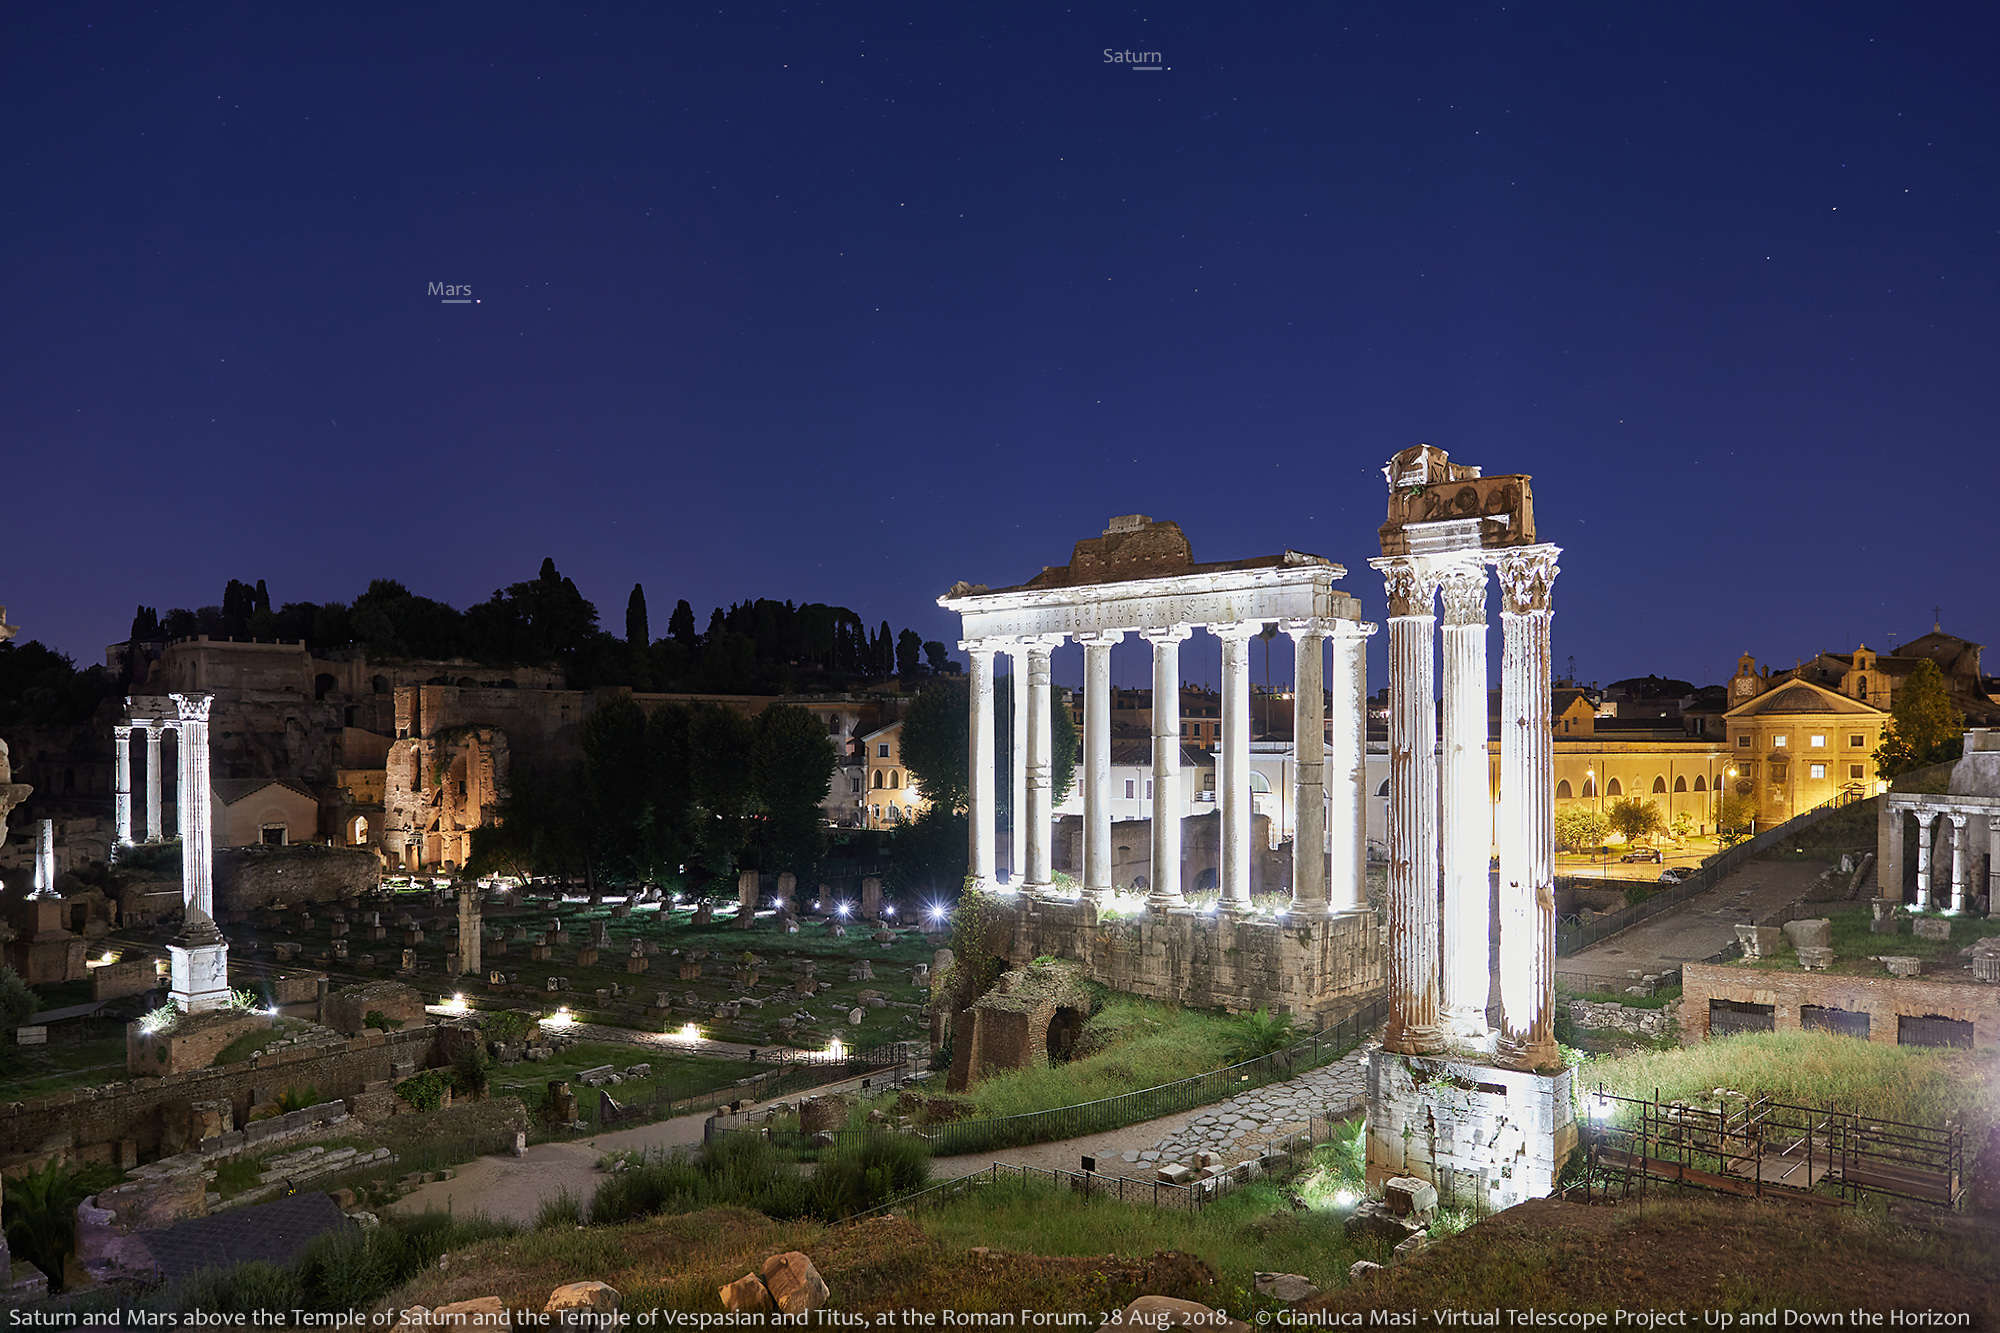 Saturn and Mars above the Temple of Saturn and the Temple of Vespasian and Titus, in the Roman Forum - 28 Aug. 2018